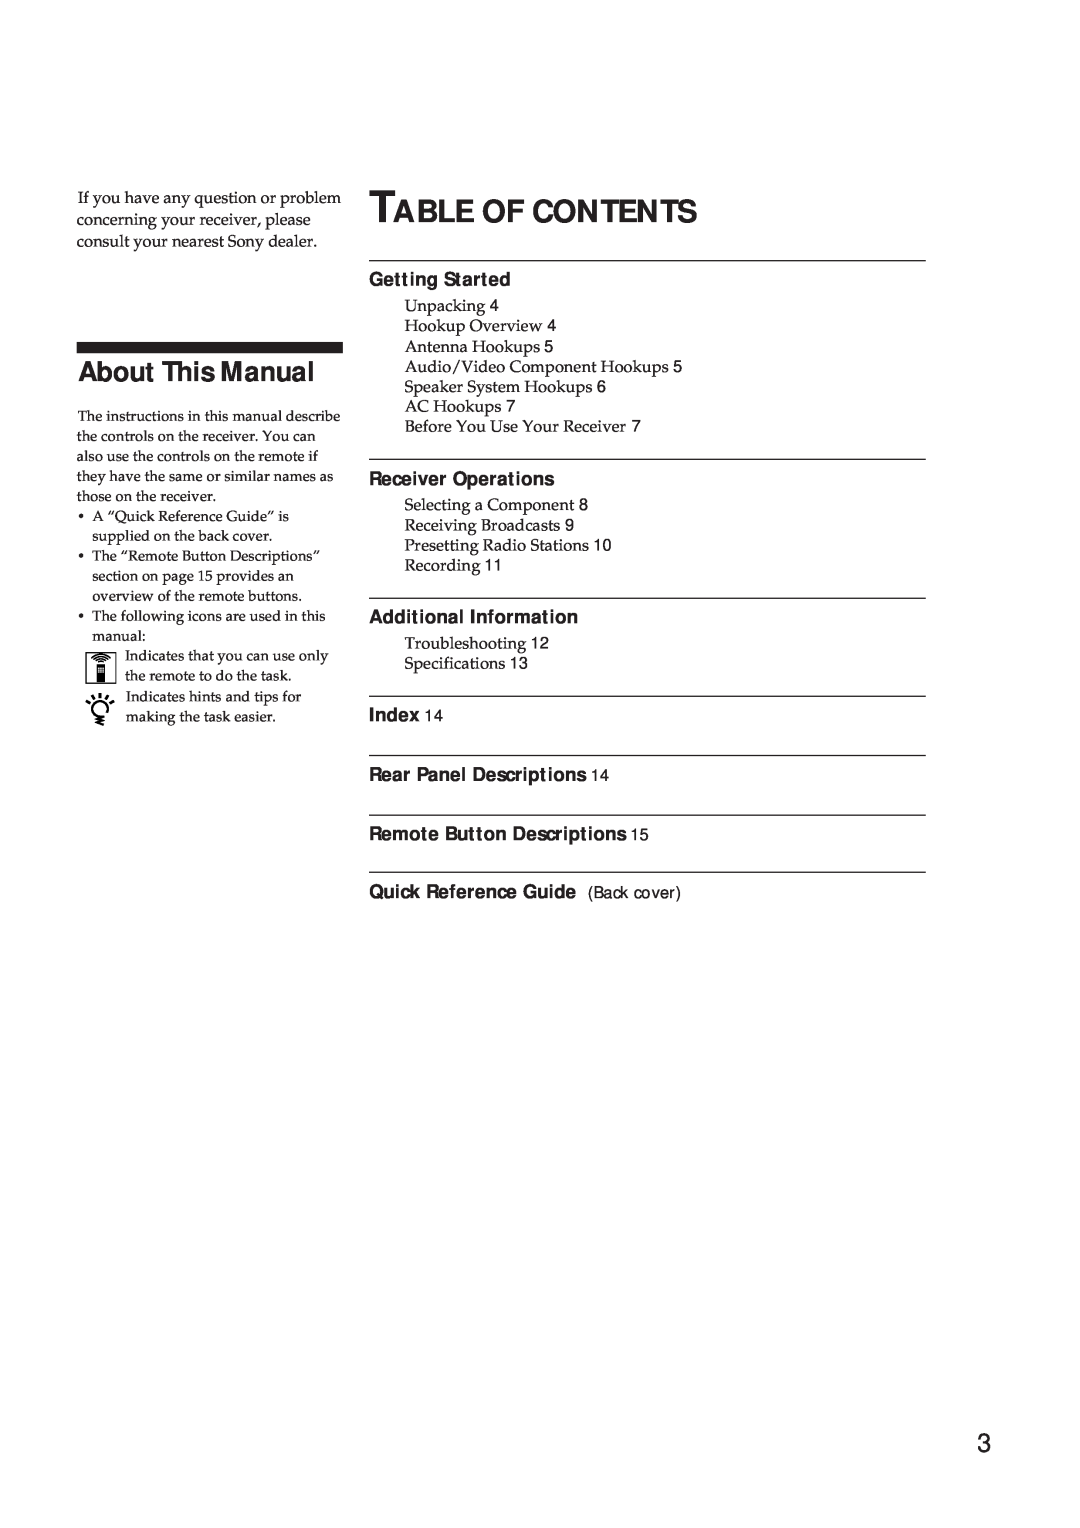 Sony STR-DE310 manual Table Of Contents, About This Manual, Getting Started, Receiver Operations, Additional Information 